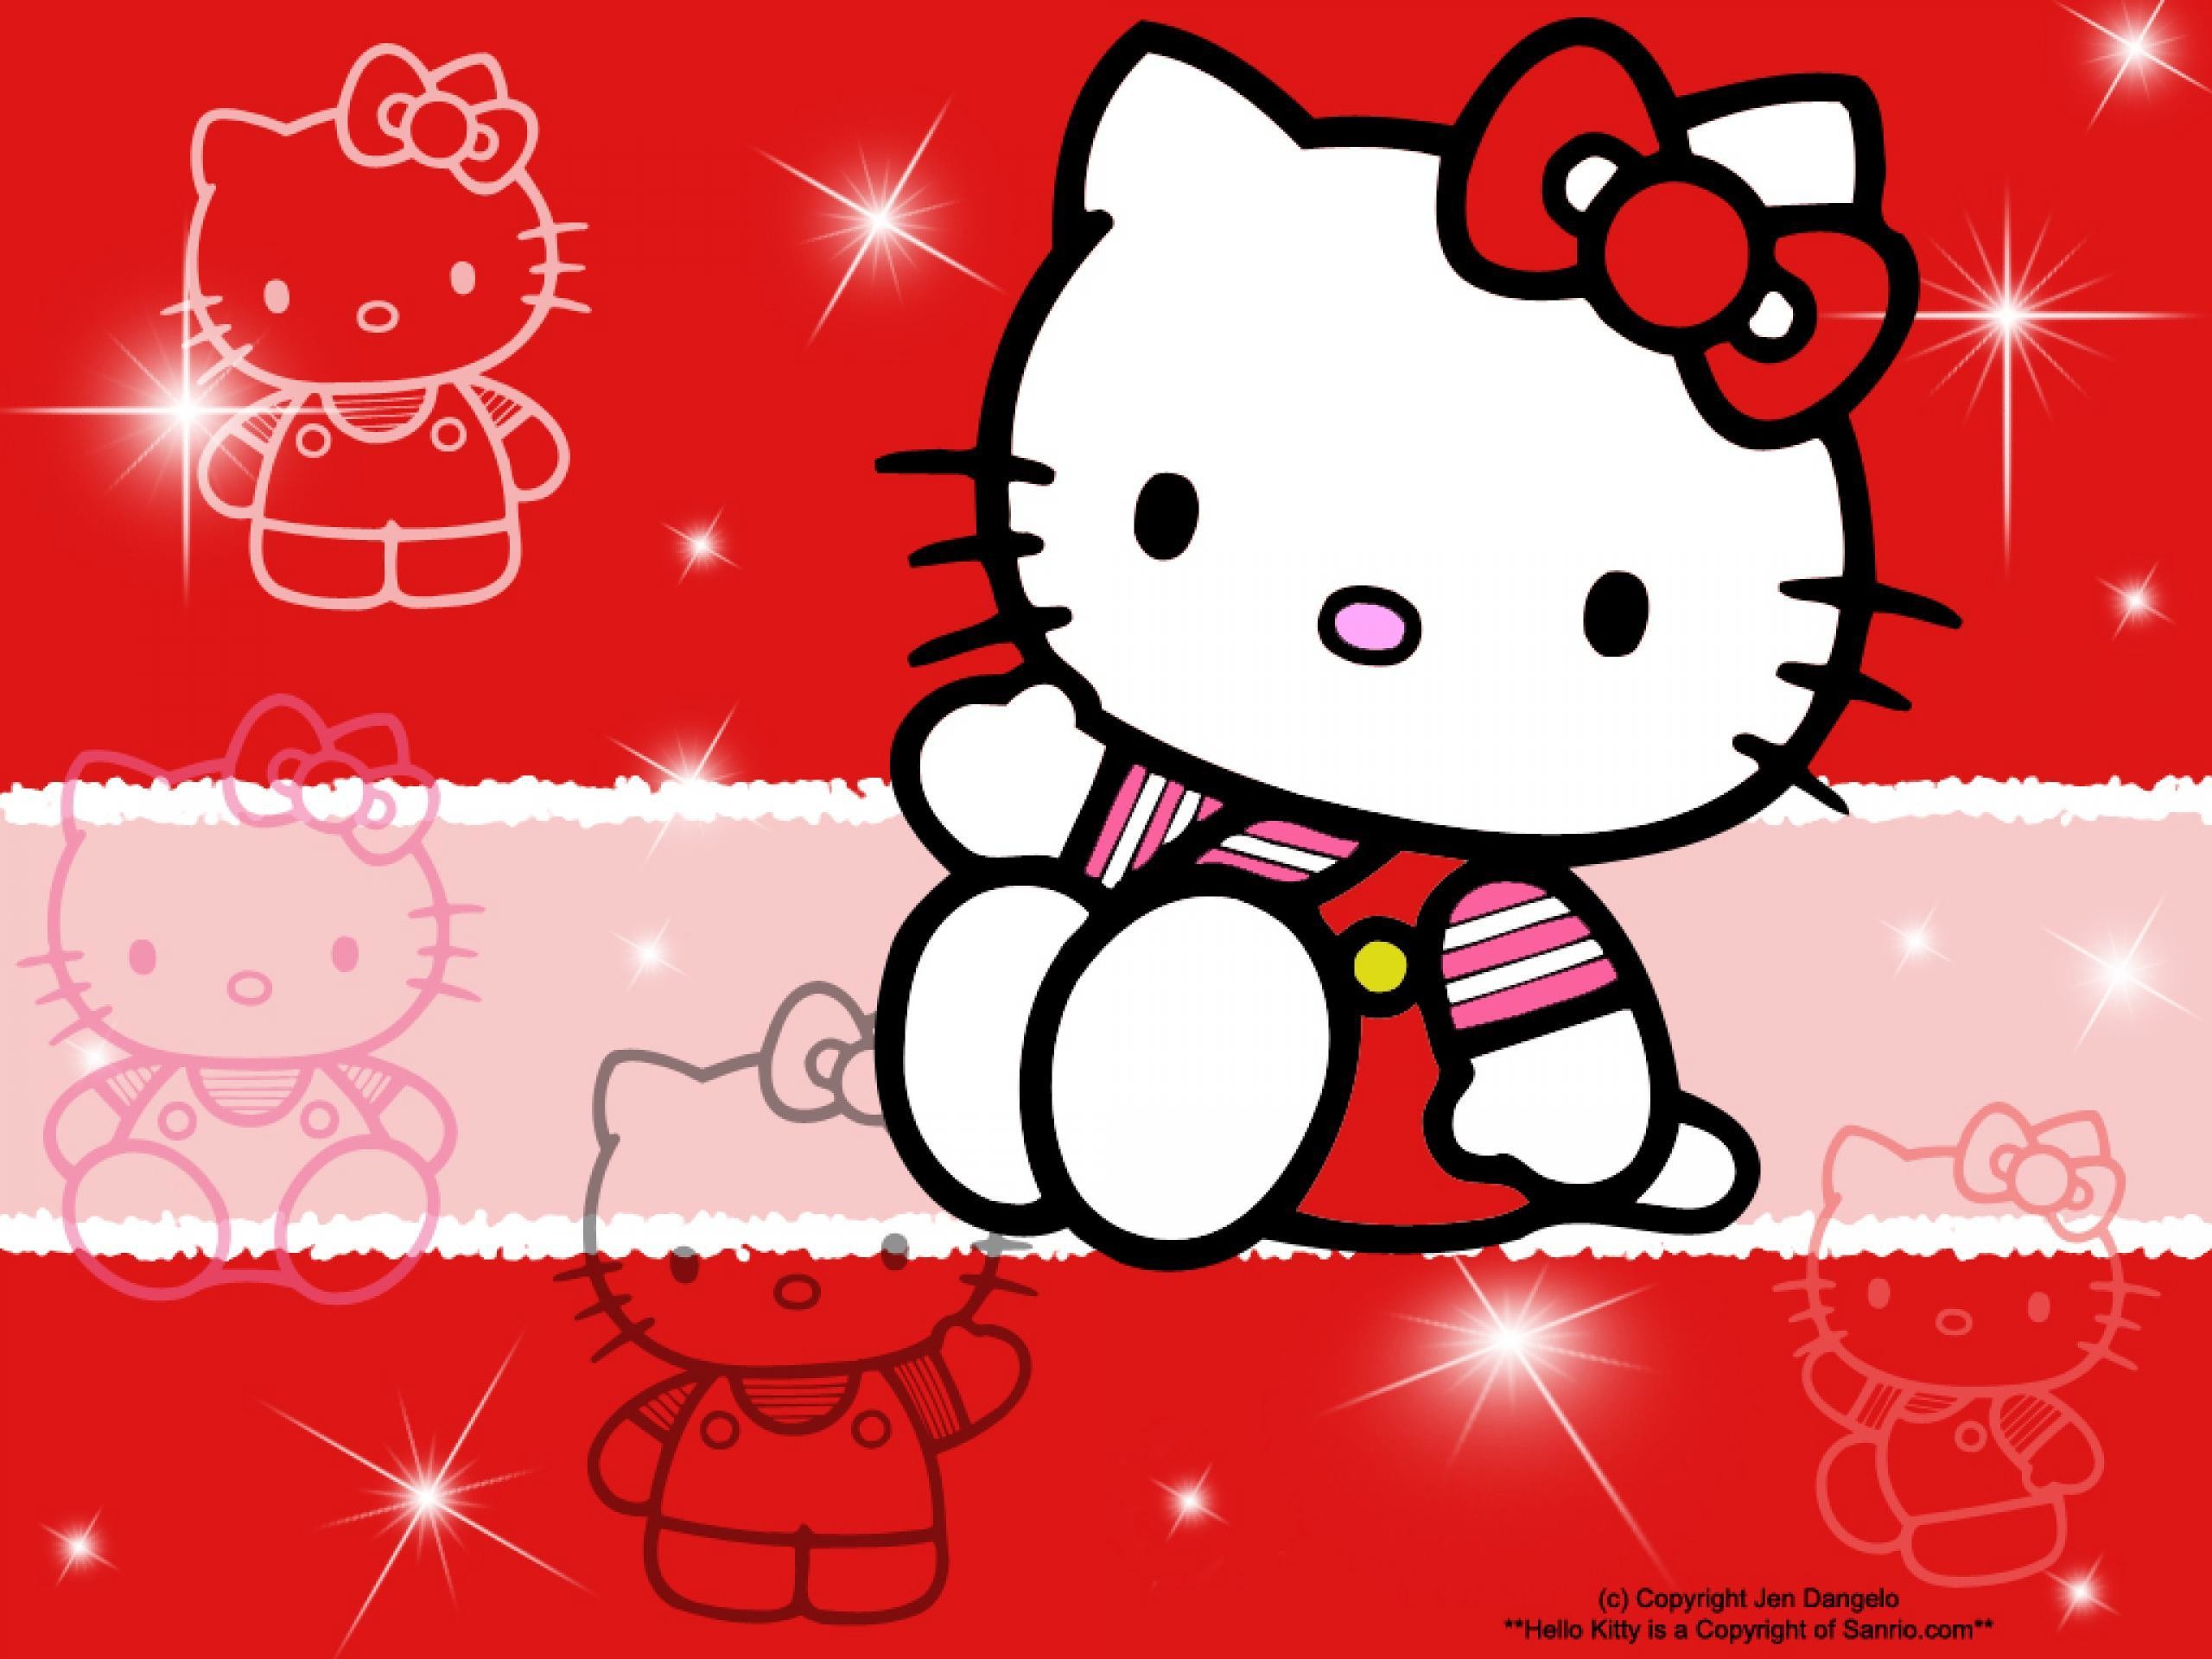  Red Hello Kitty  Wallpaper 56 pictures 